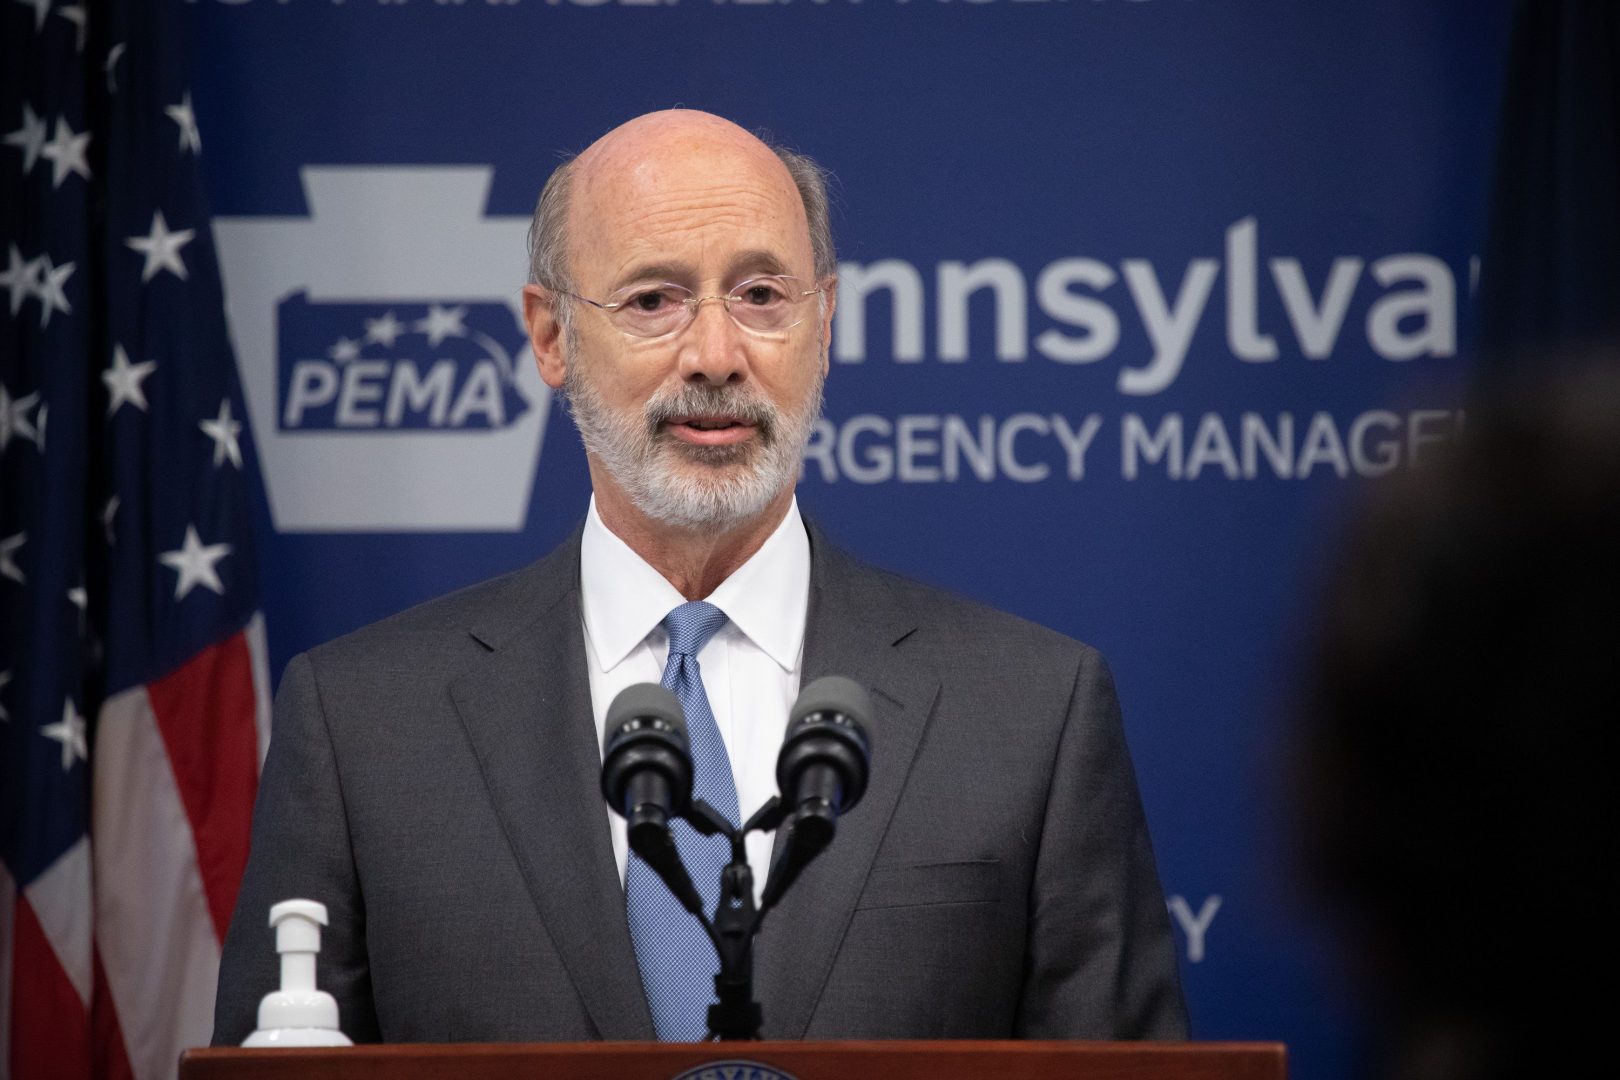 Asked at a press conference Monday whether he would extend the eviction moratorium, Gov. Tom Wolf said he was “not ready to say anything.”